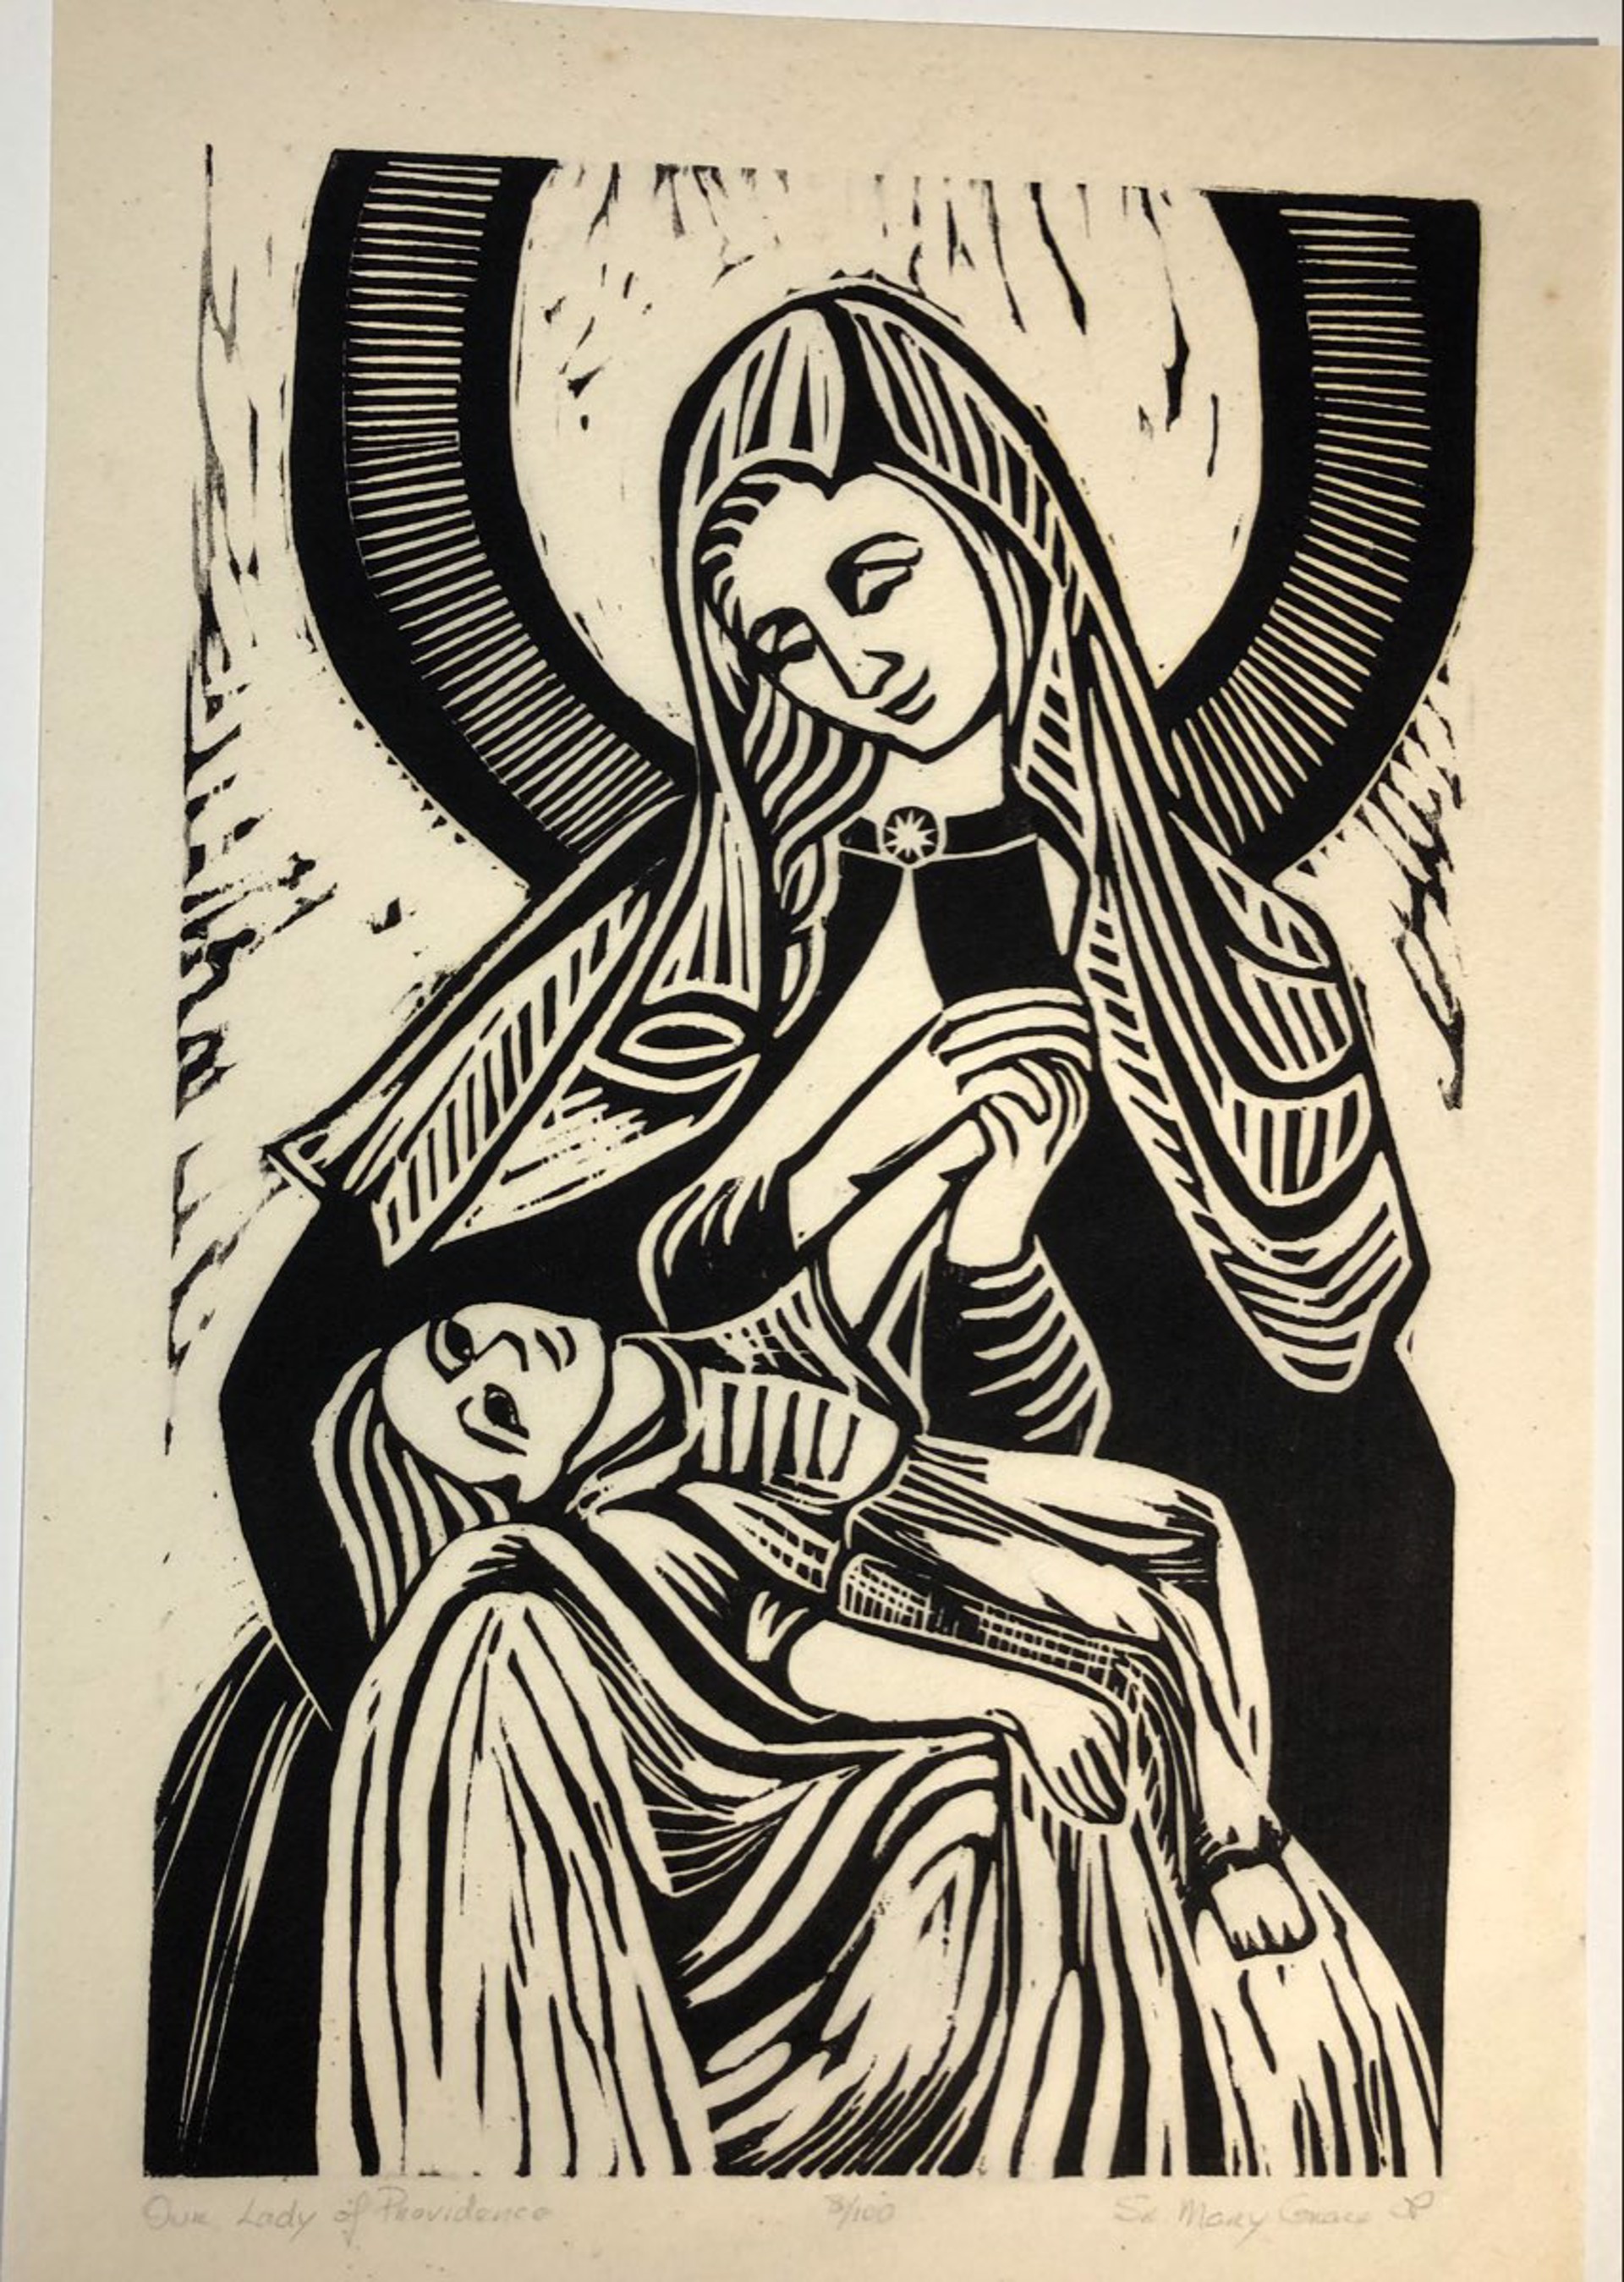 Our Lady of Providence (Patroness of Puerto Rico) by Sister Mary Grace Thul